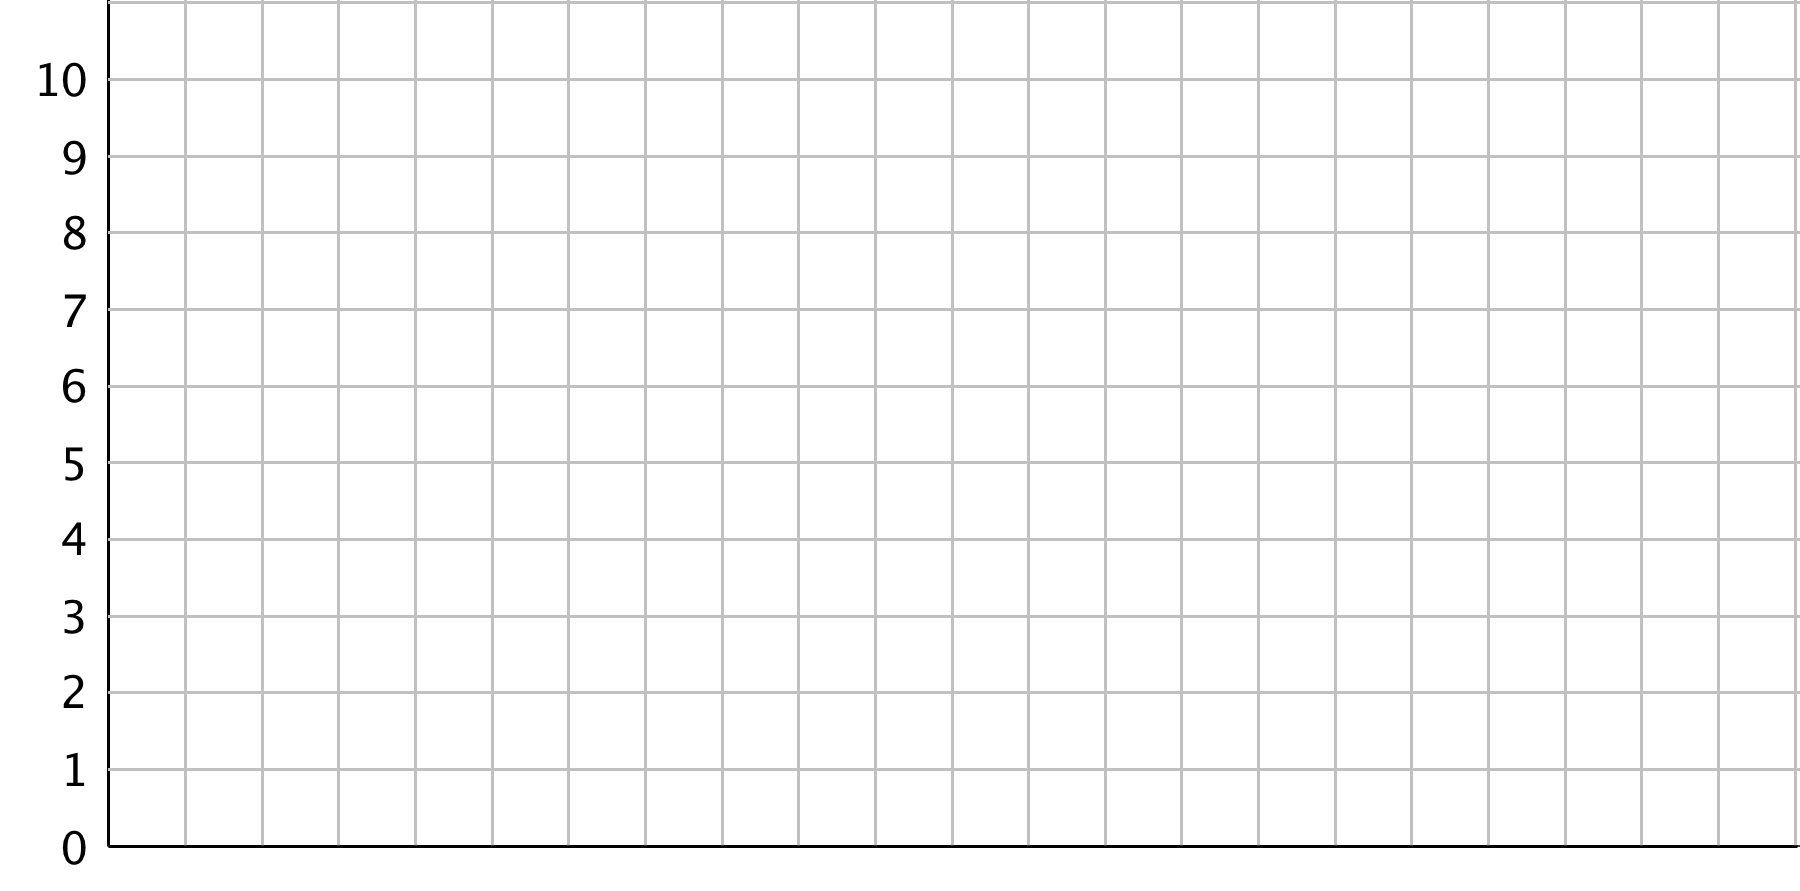 A blank coordinate grid. The vertical axis has the numbers 0 through 10 indicated. The horizontal axis has 21 grid lines with no labels.